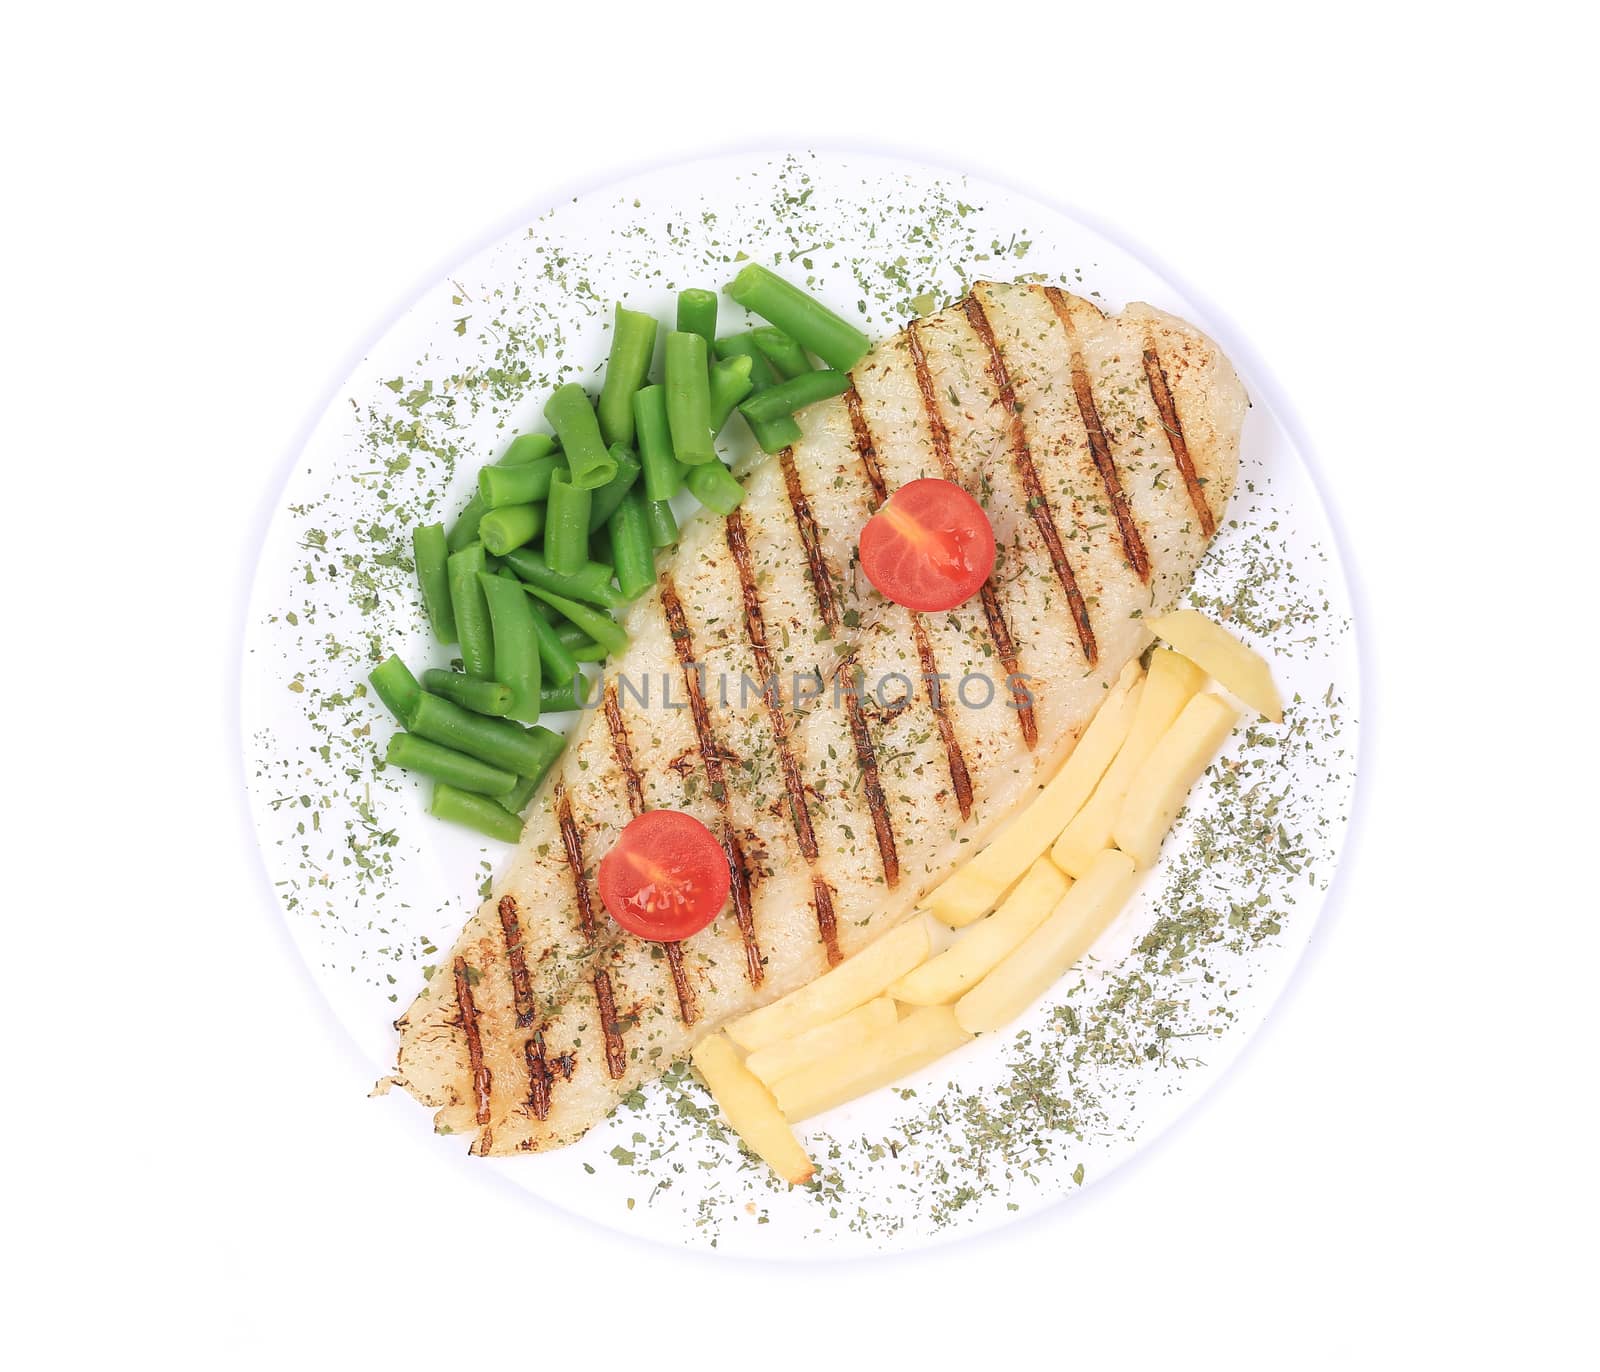 Pangasius fillet grilled with vegetables. by indigolotos